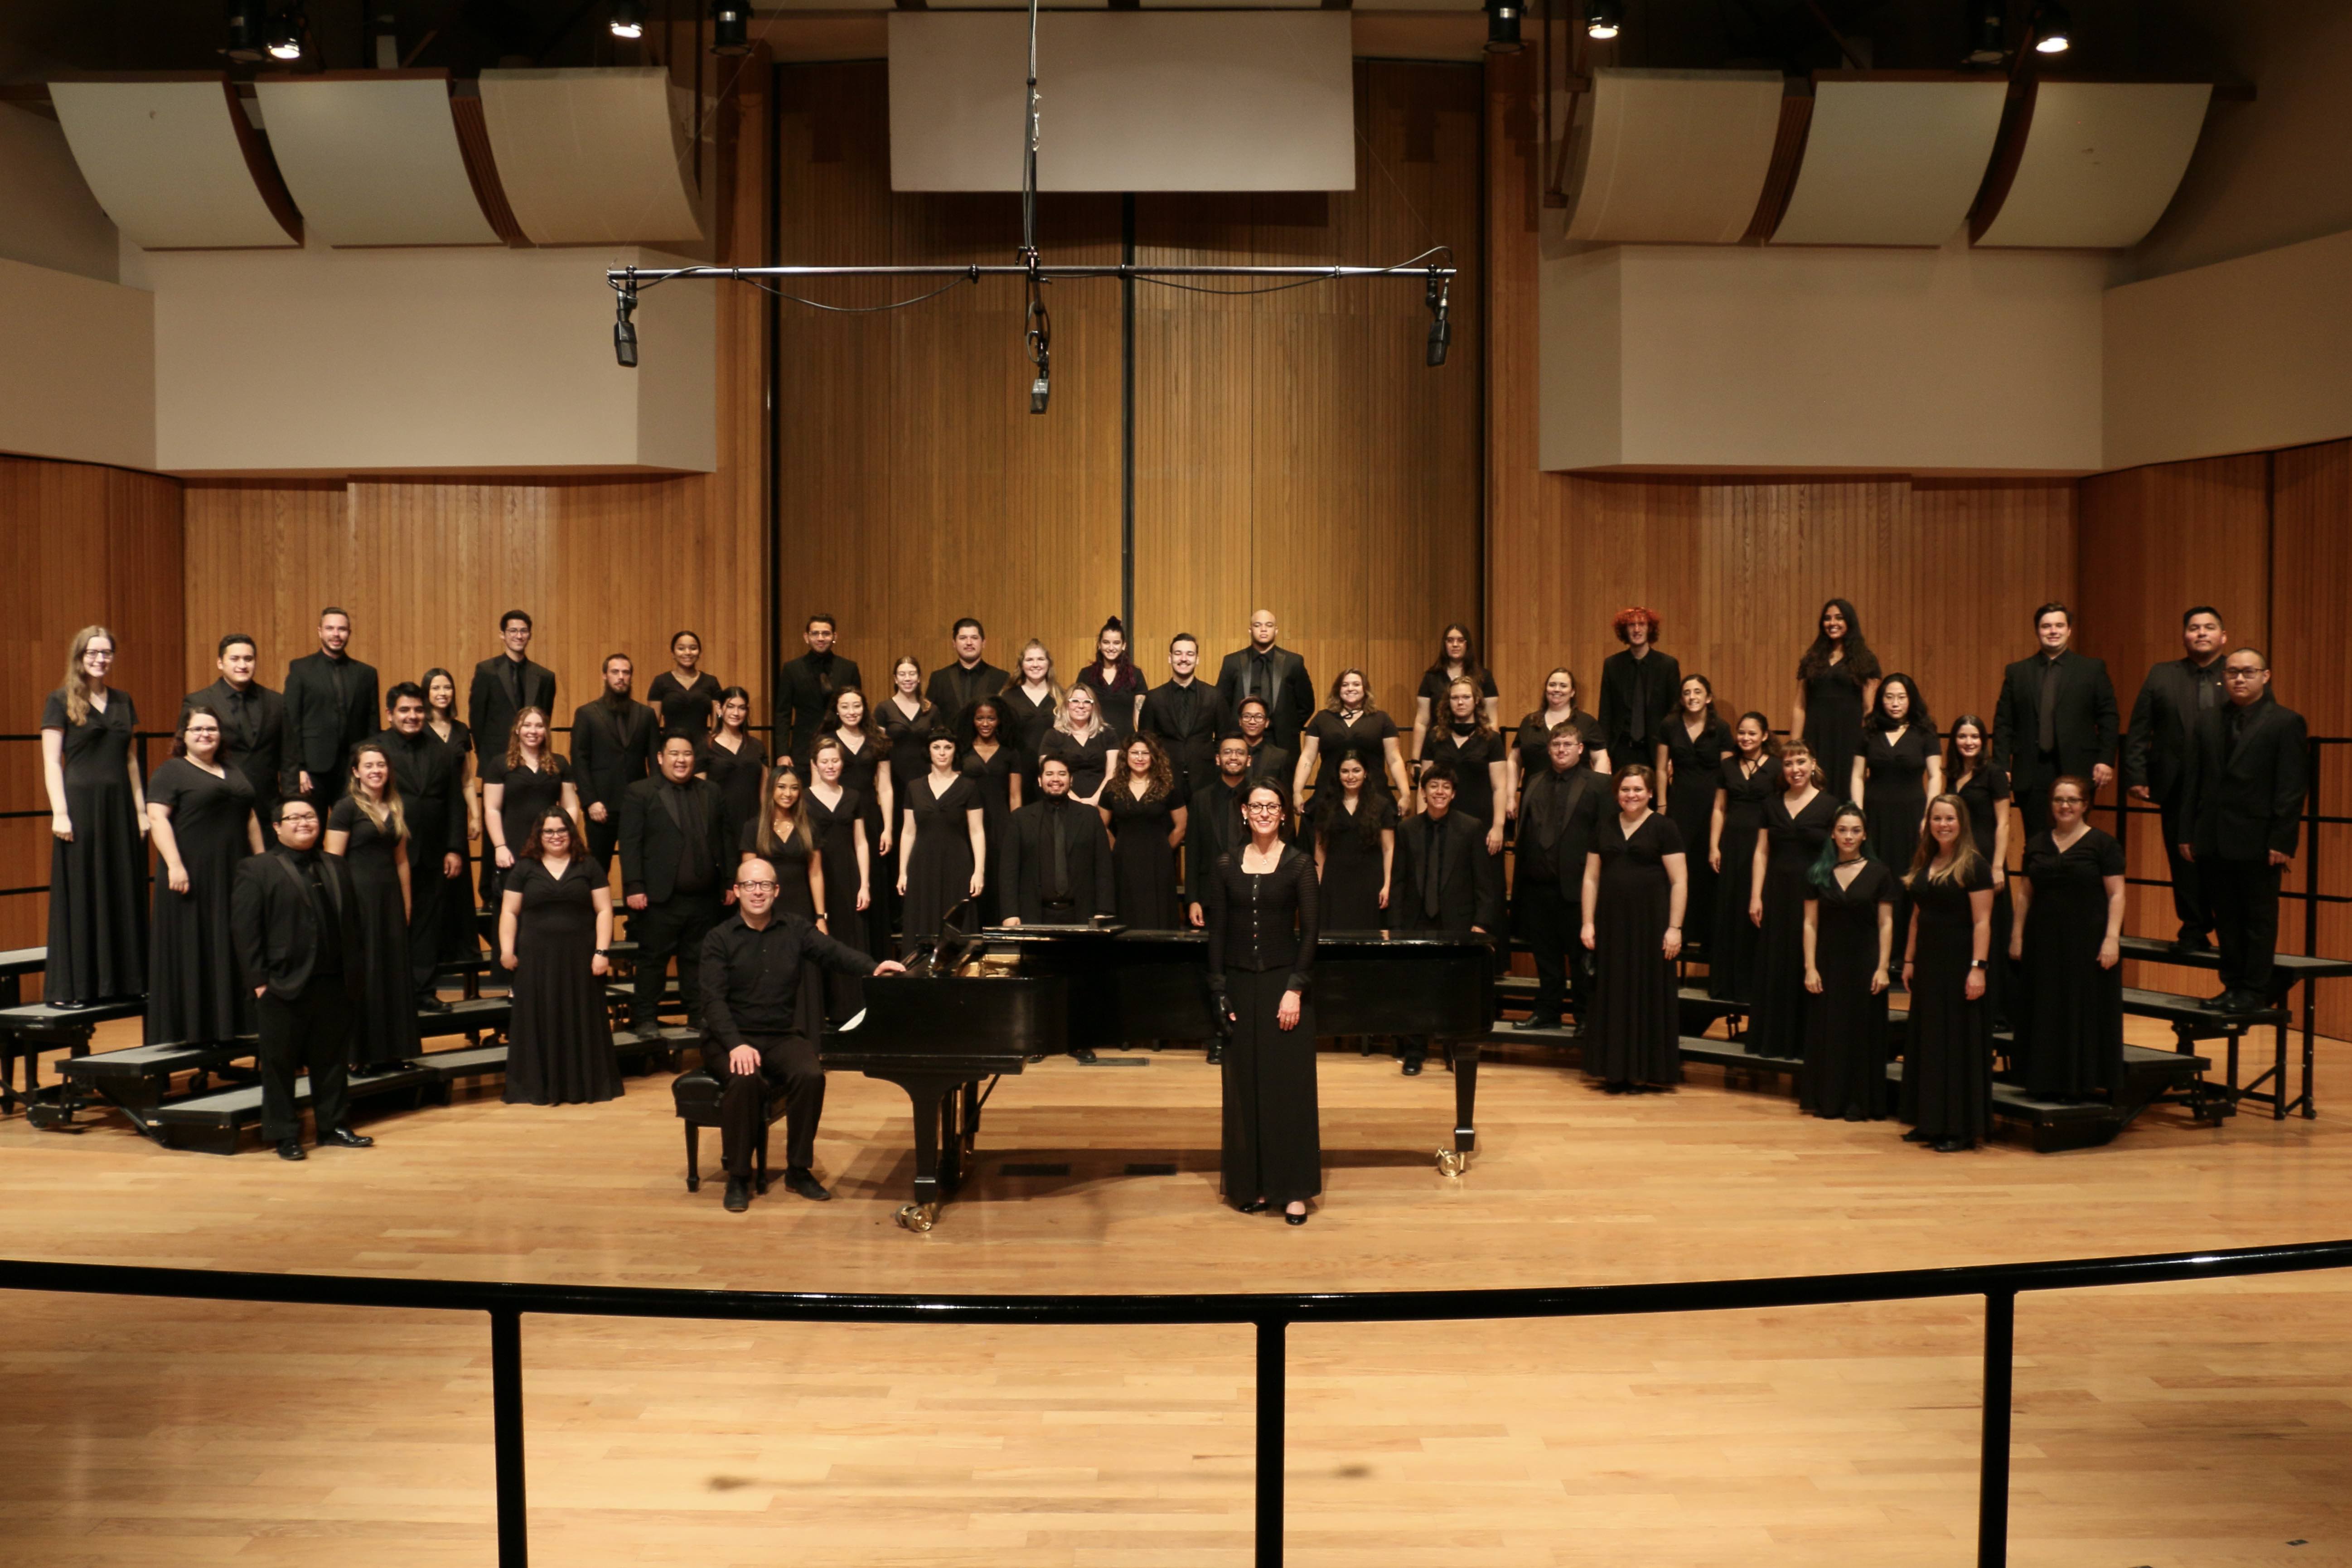 Fresno State Concert Choir on stage in the Concert Hall. Students are wearing all black and facing the camera.